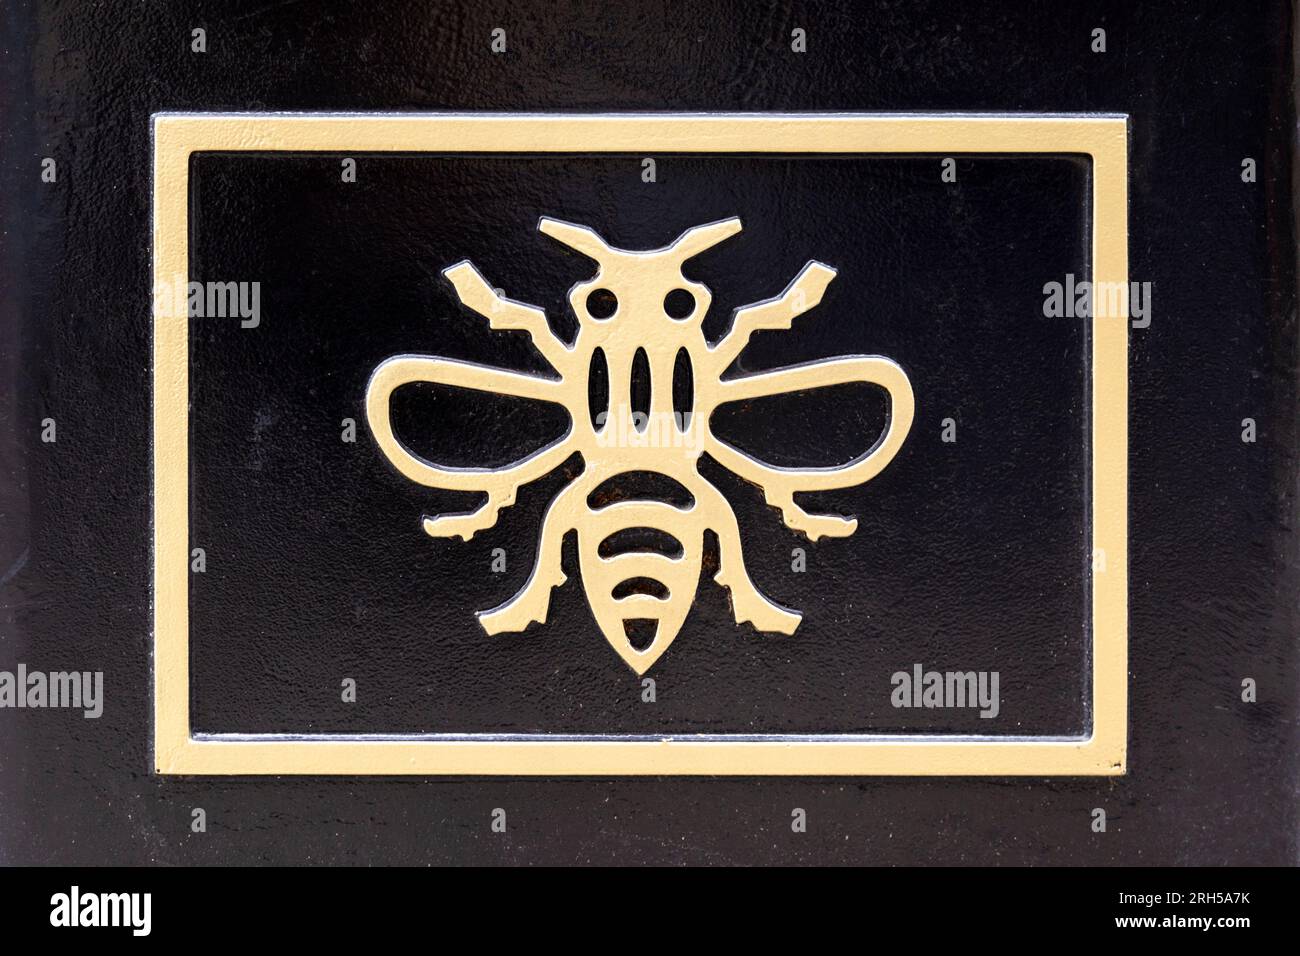 A bee design by Hargreaves Foundry embossed on a planter in Manchester, England Stock Photo